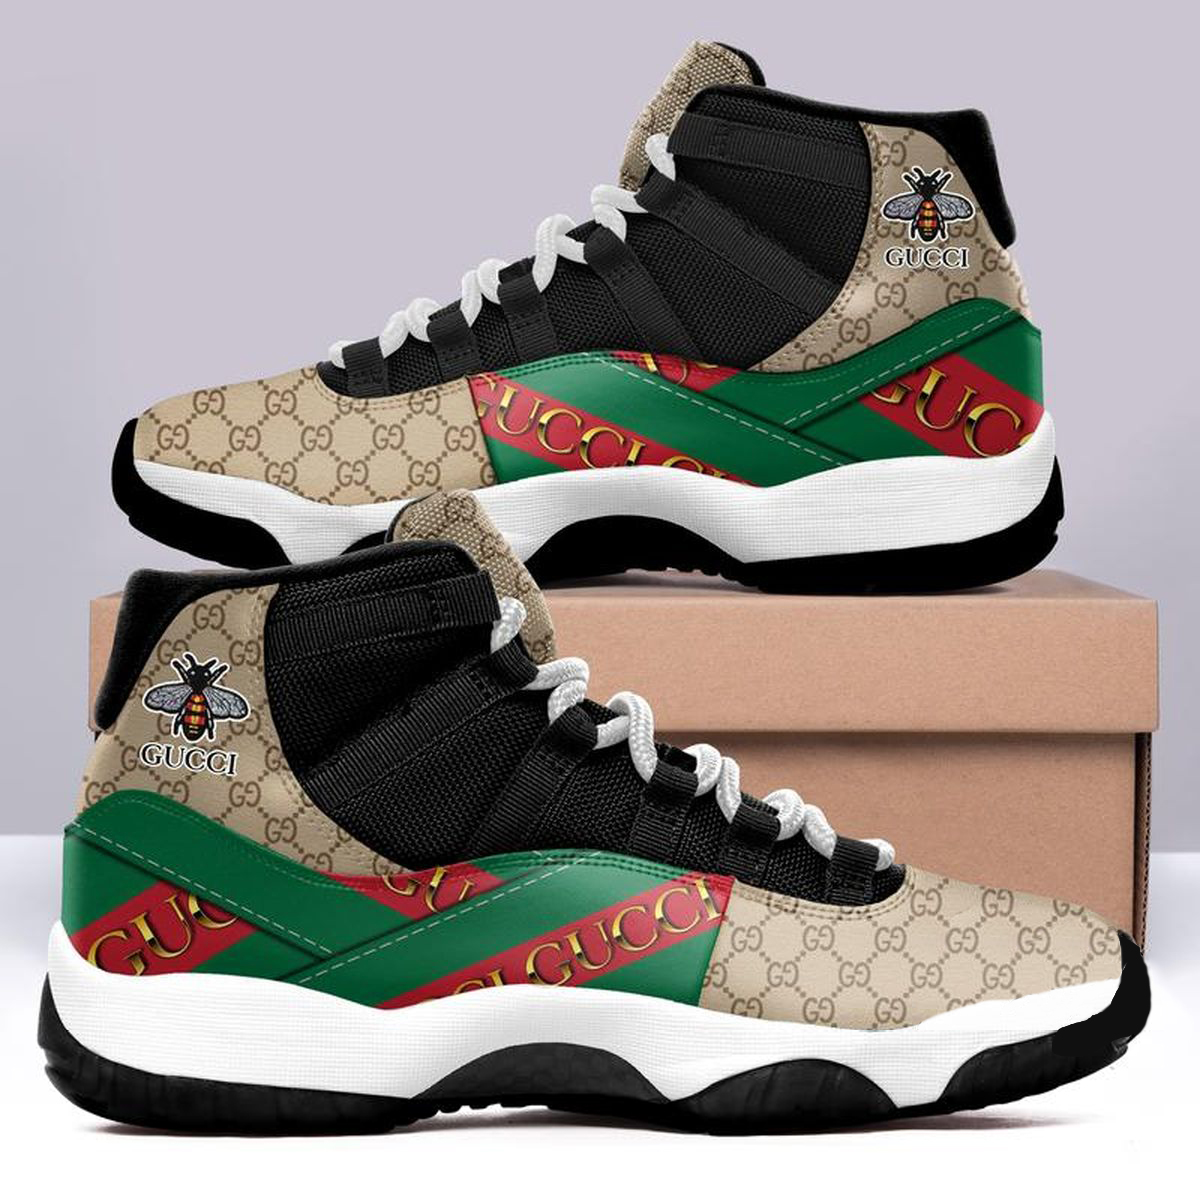 Luxury Gucci Bee Air Jordan 11 Shoes Hot 2022 Gucci Sneakers Gifts For Men Women HT